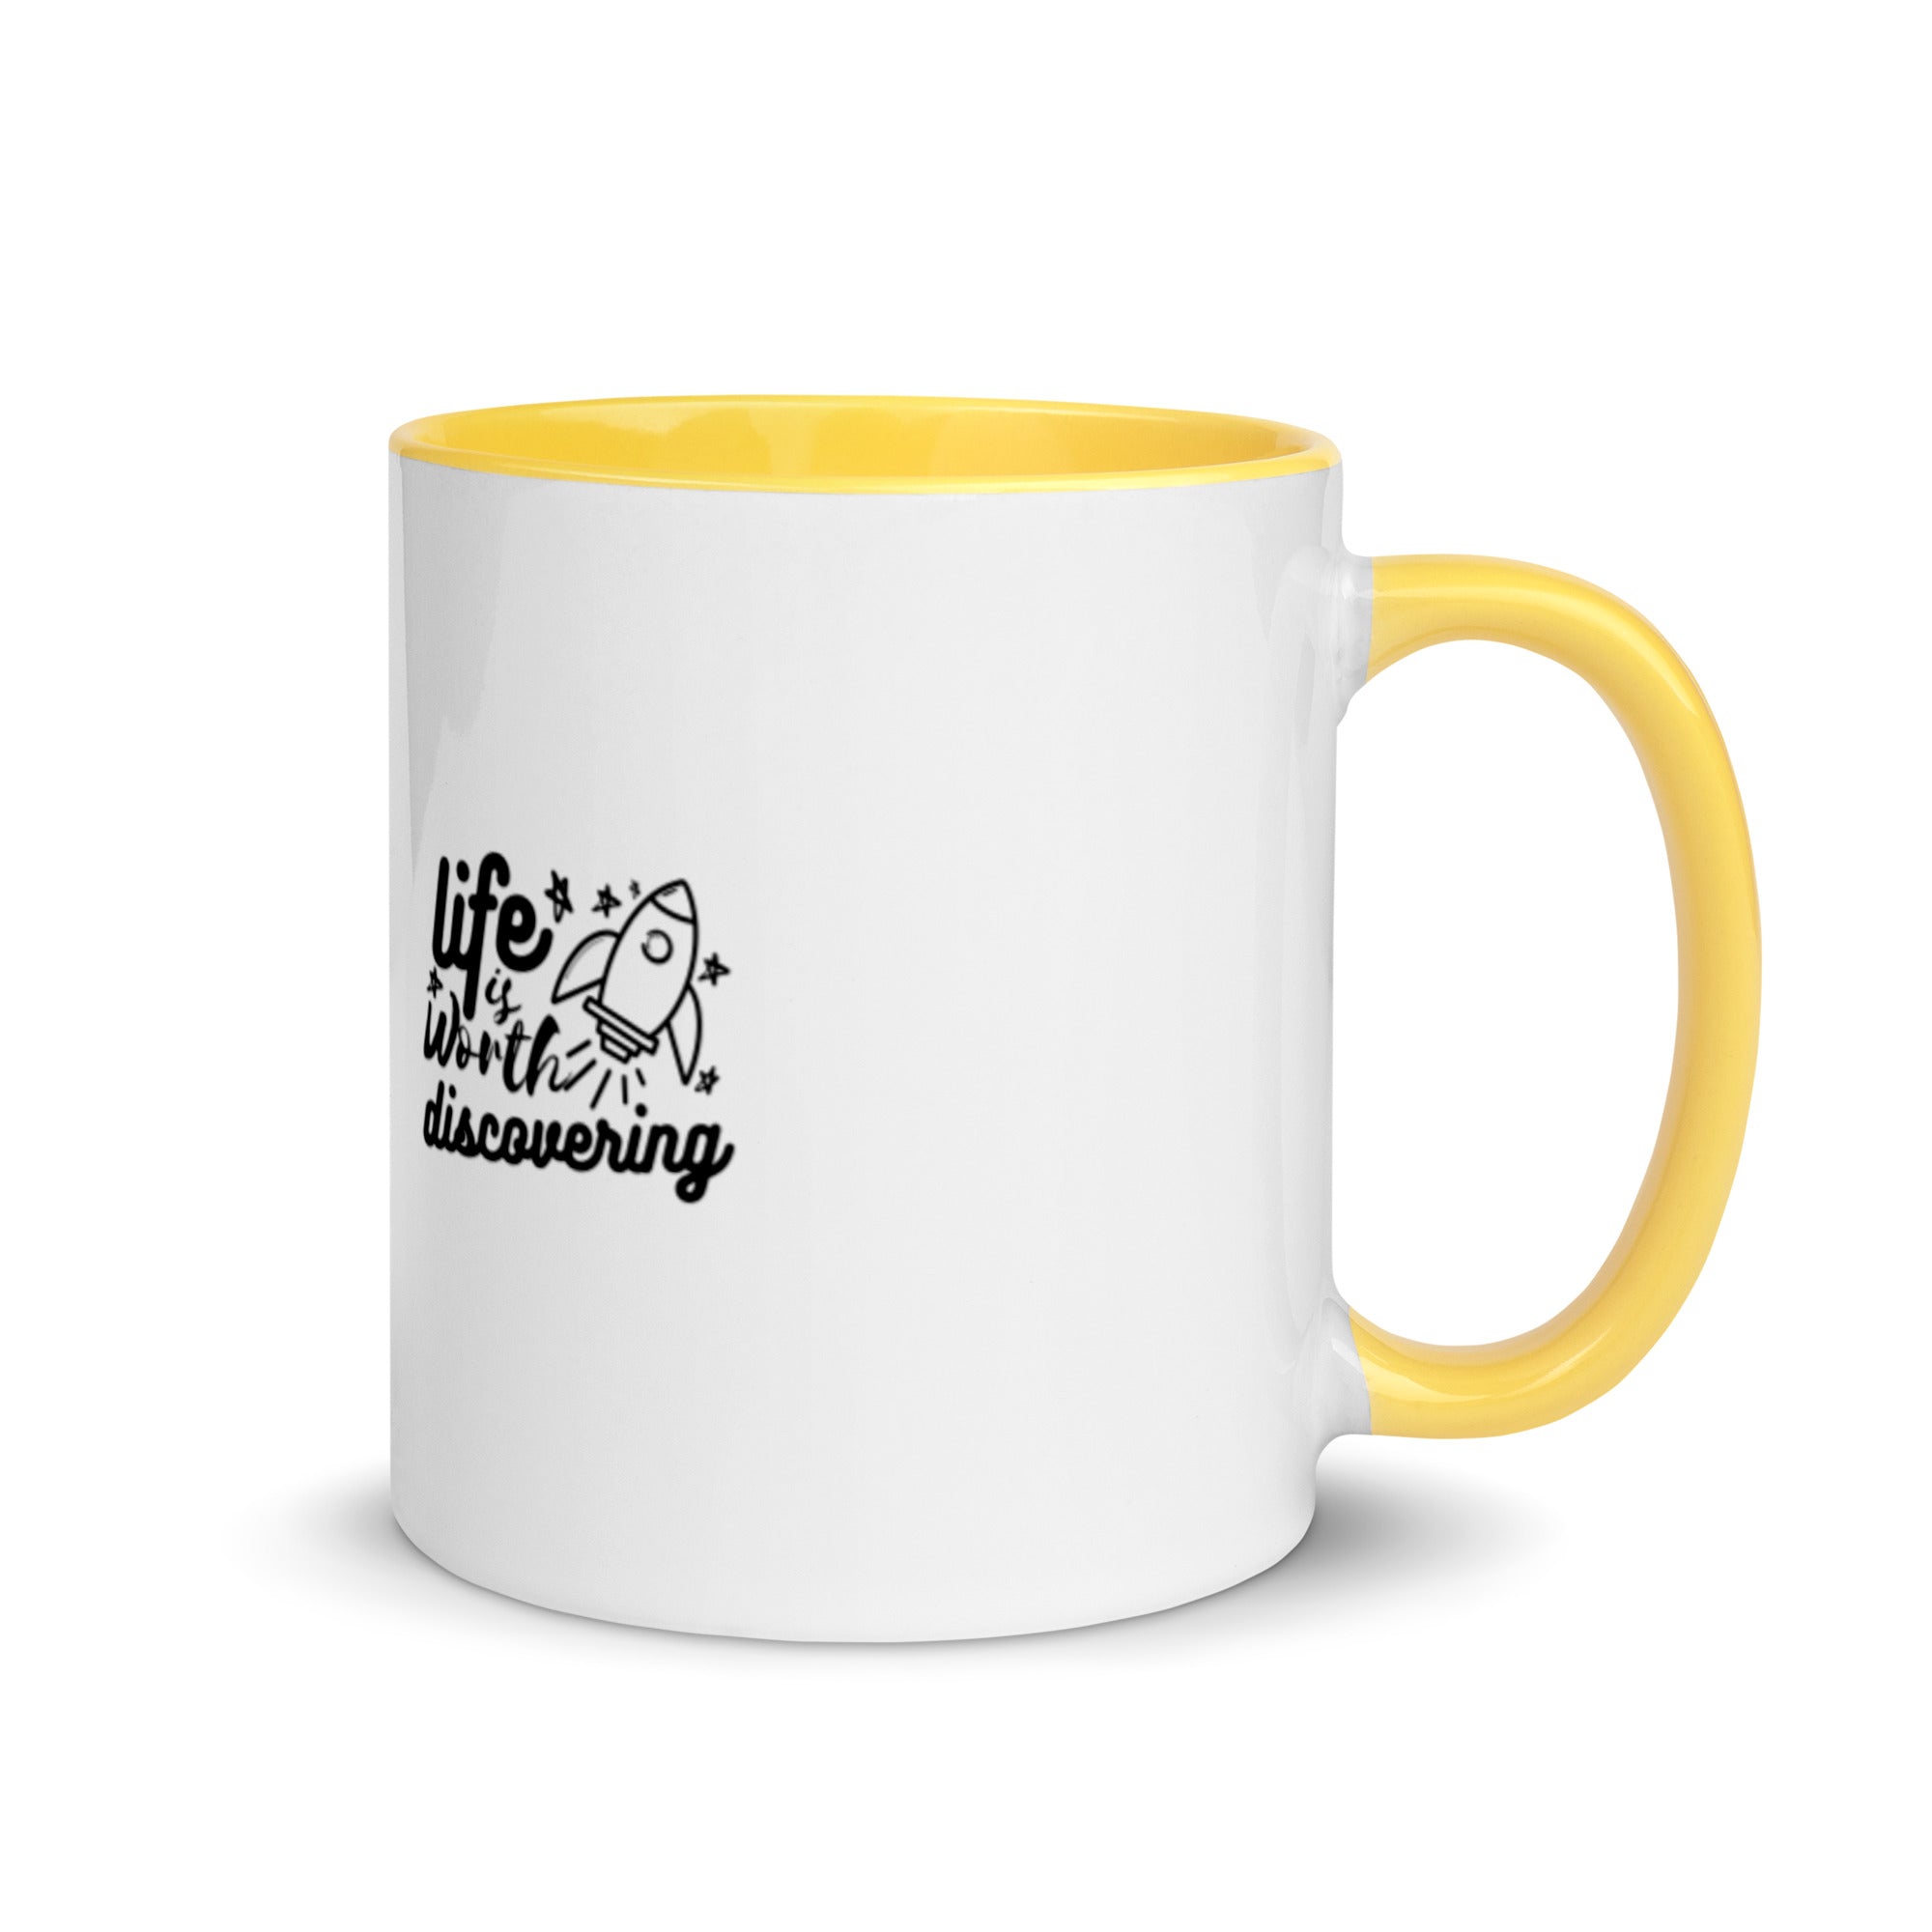 Life Is Worth Discovering - Mug with Color Inside